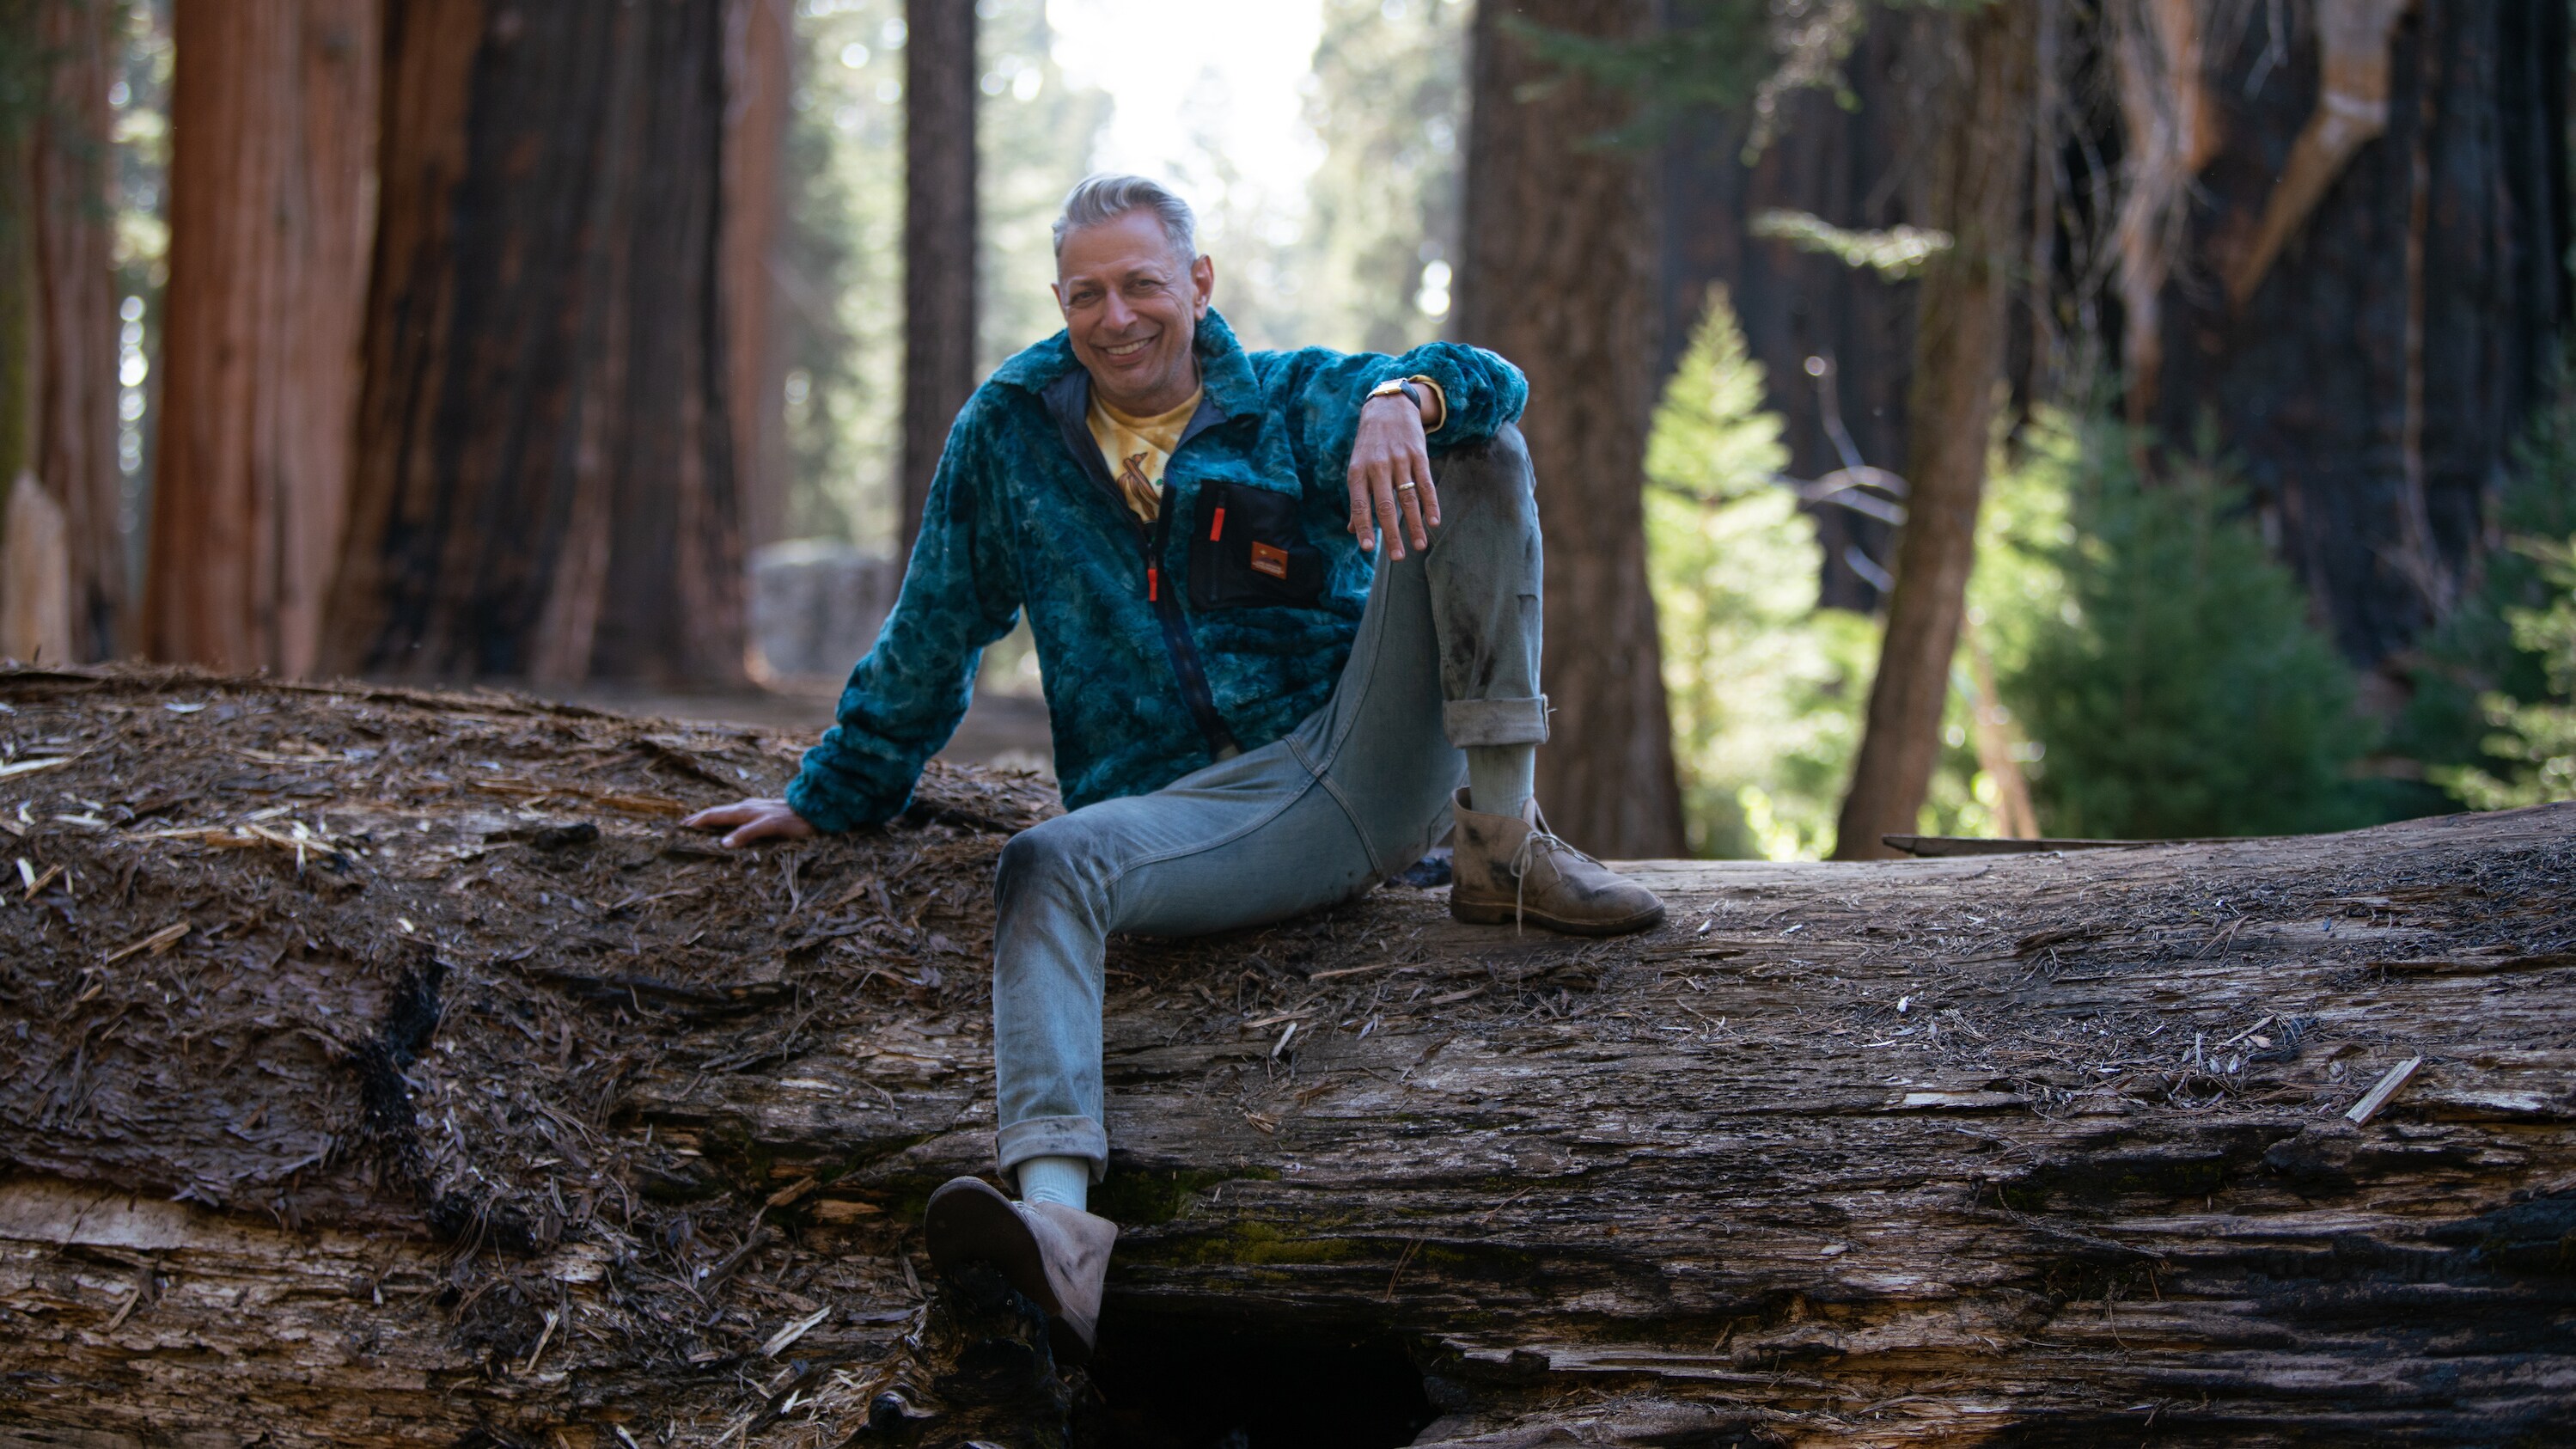 CA - Jeff Goldblum in Sequoia National Park, CA. (Credit: National Geographic)